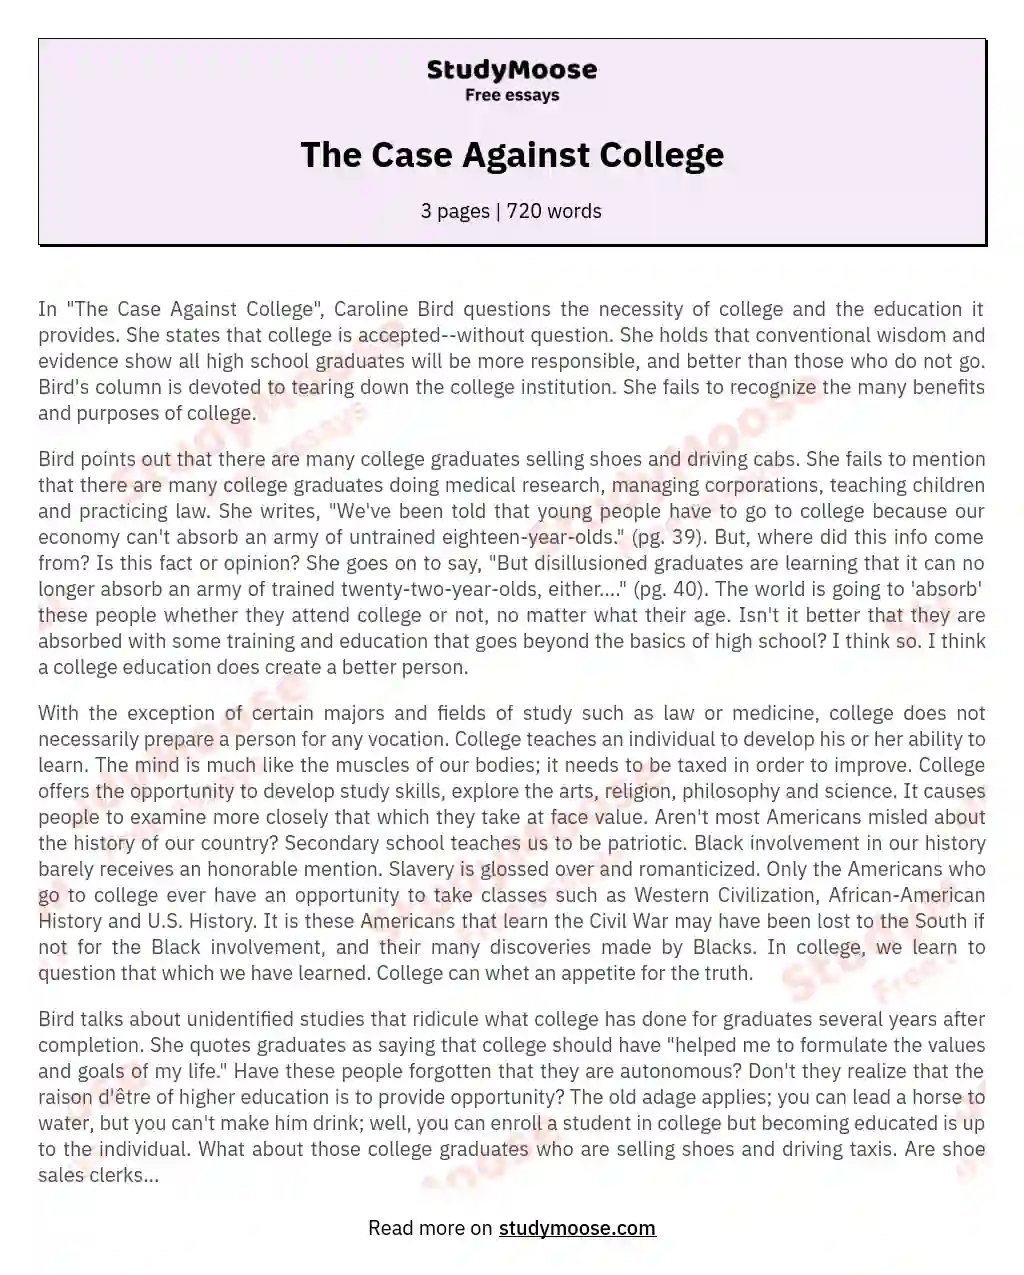 The Case Against College